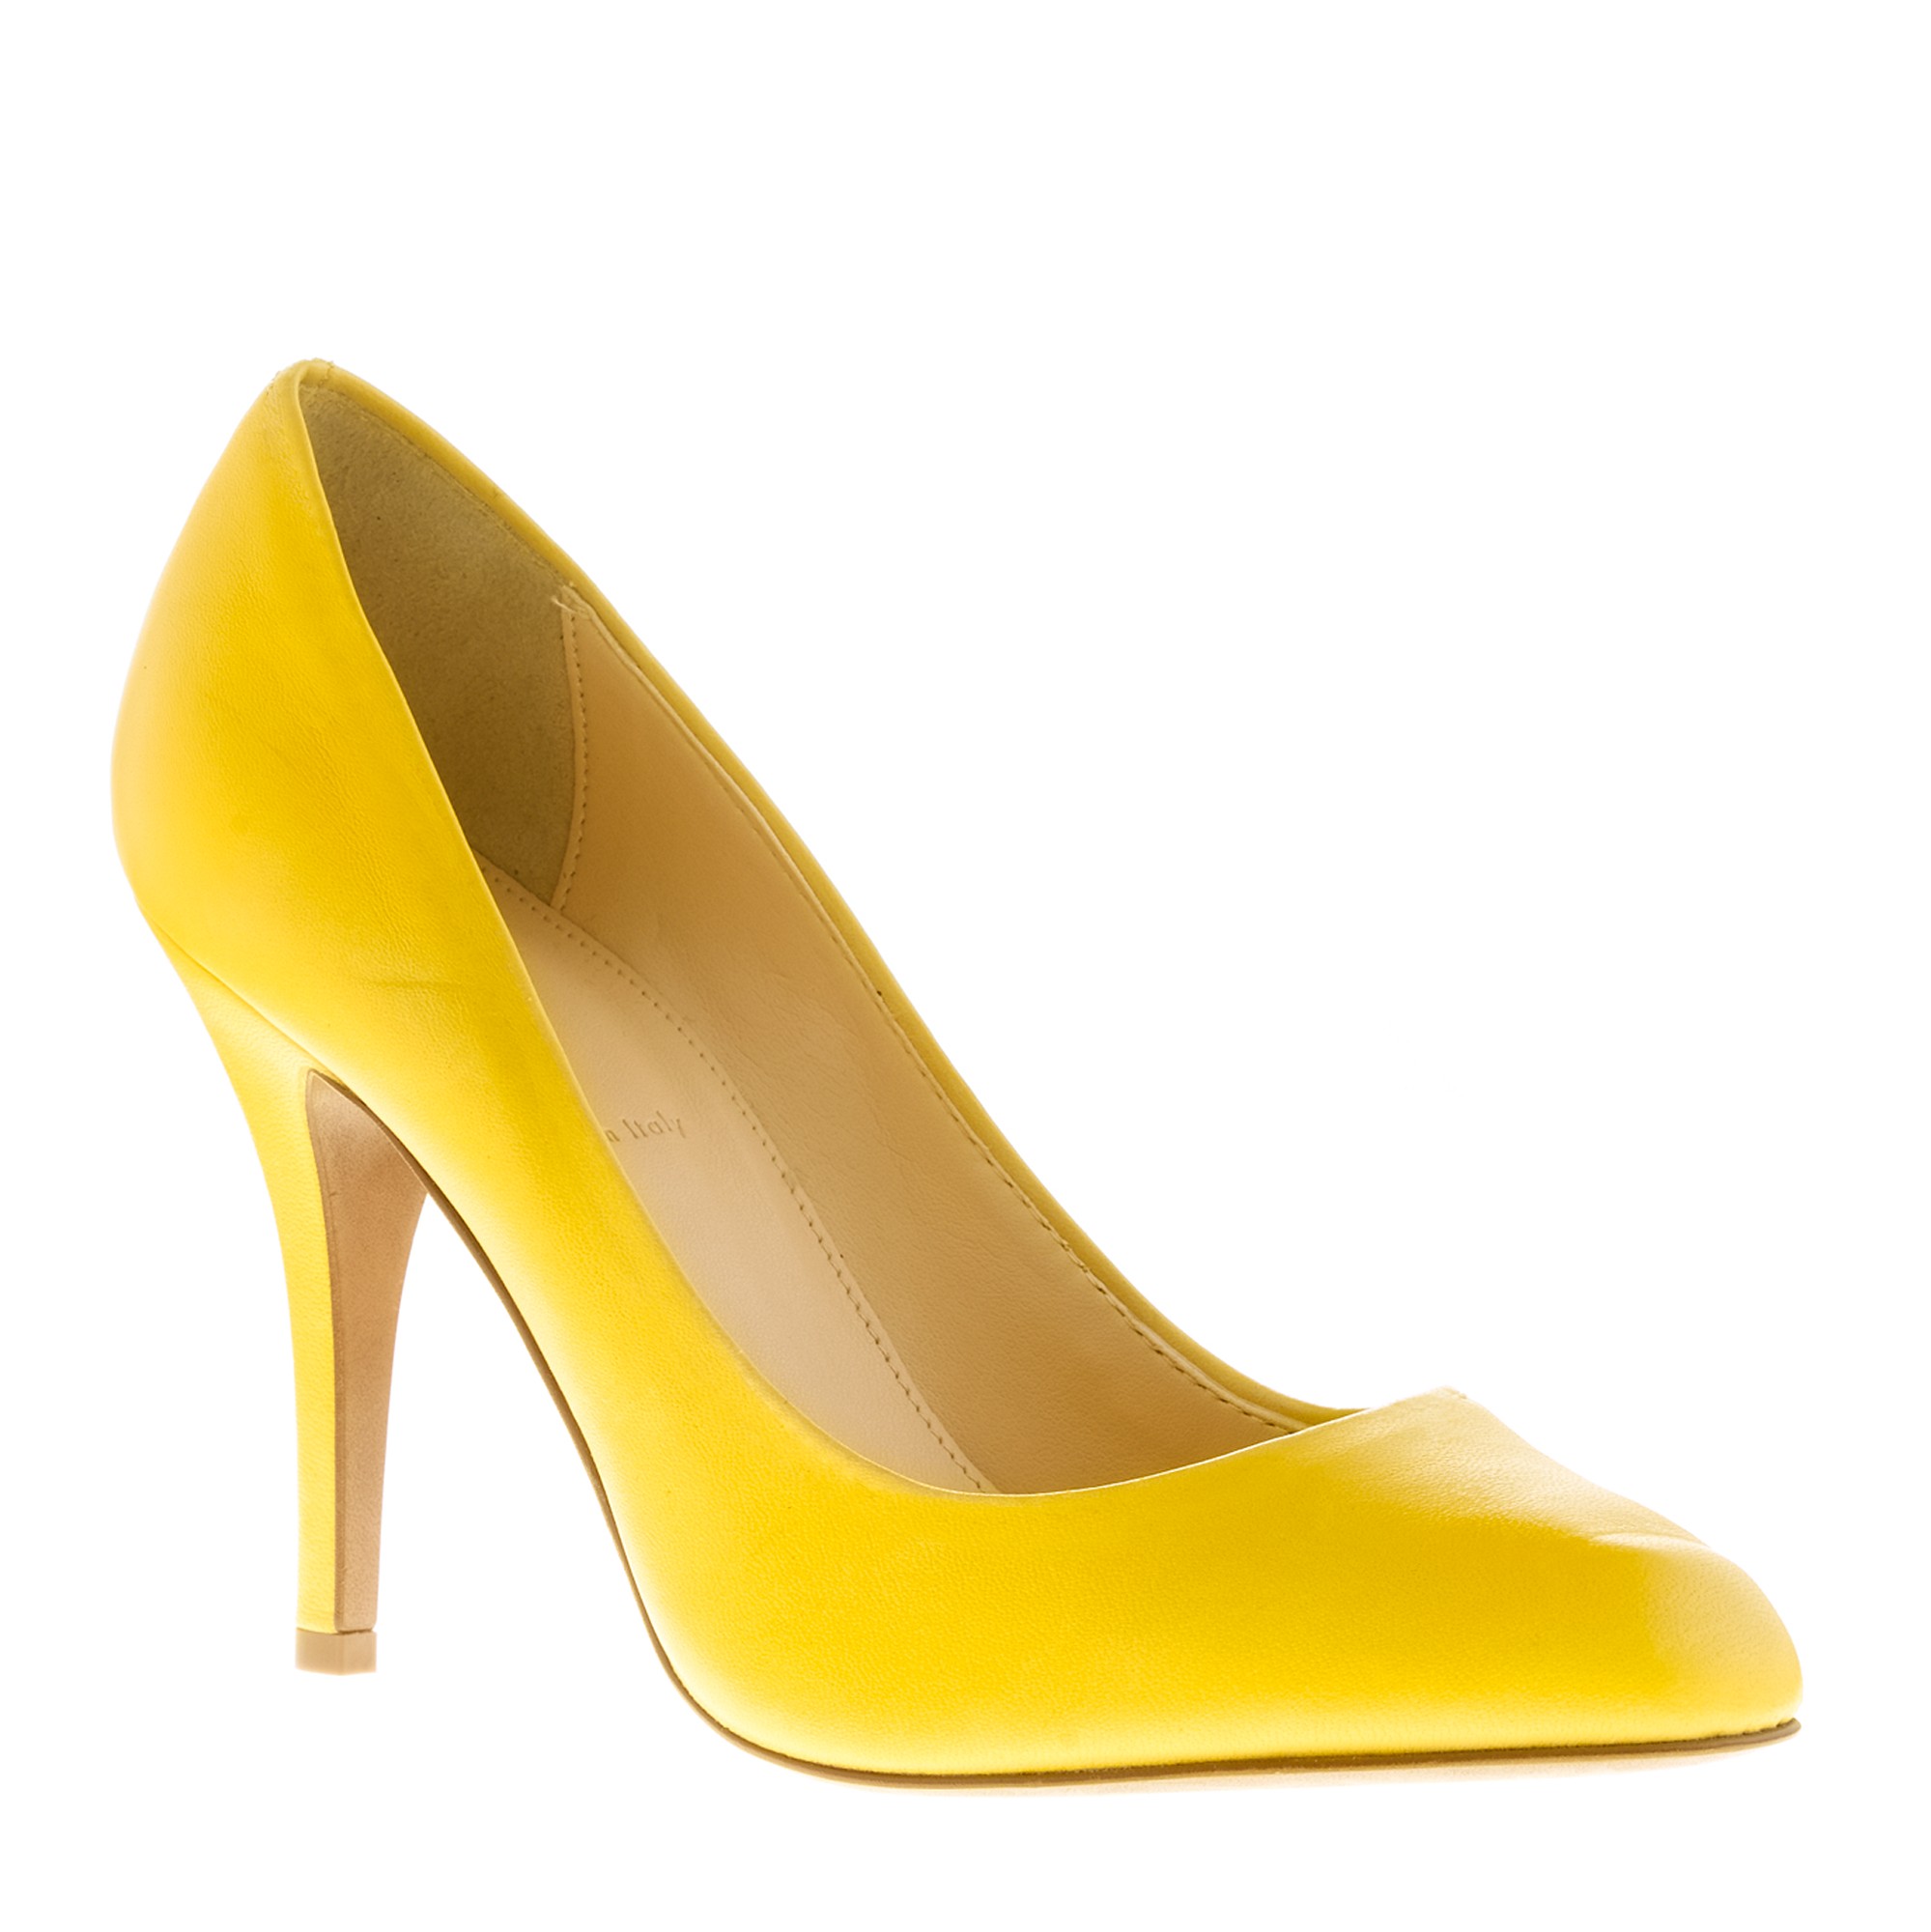 J.crew Mona Leather Pumps in Yellow | Lyst